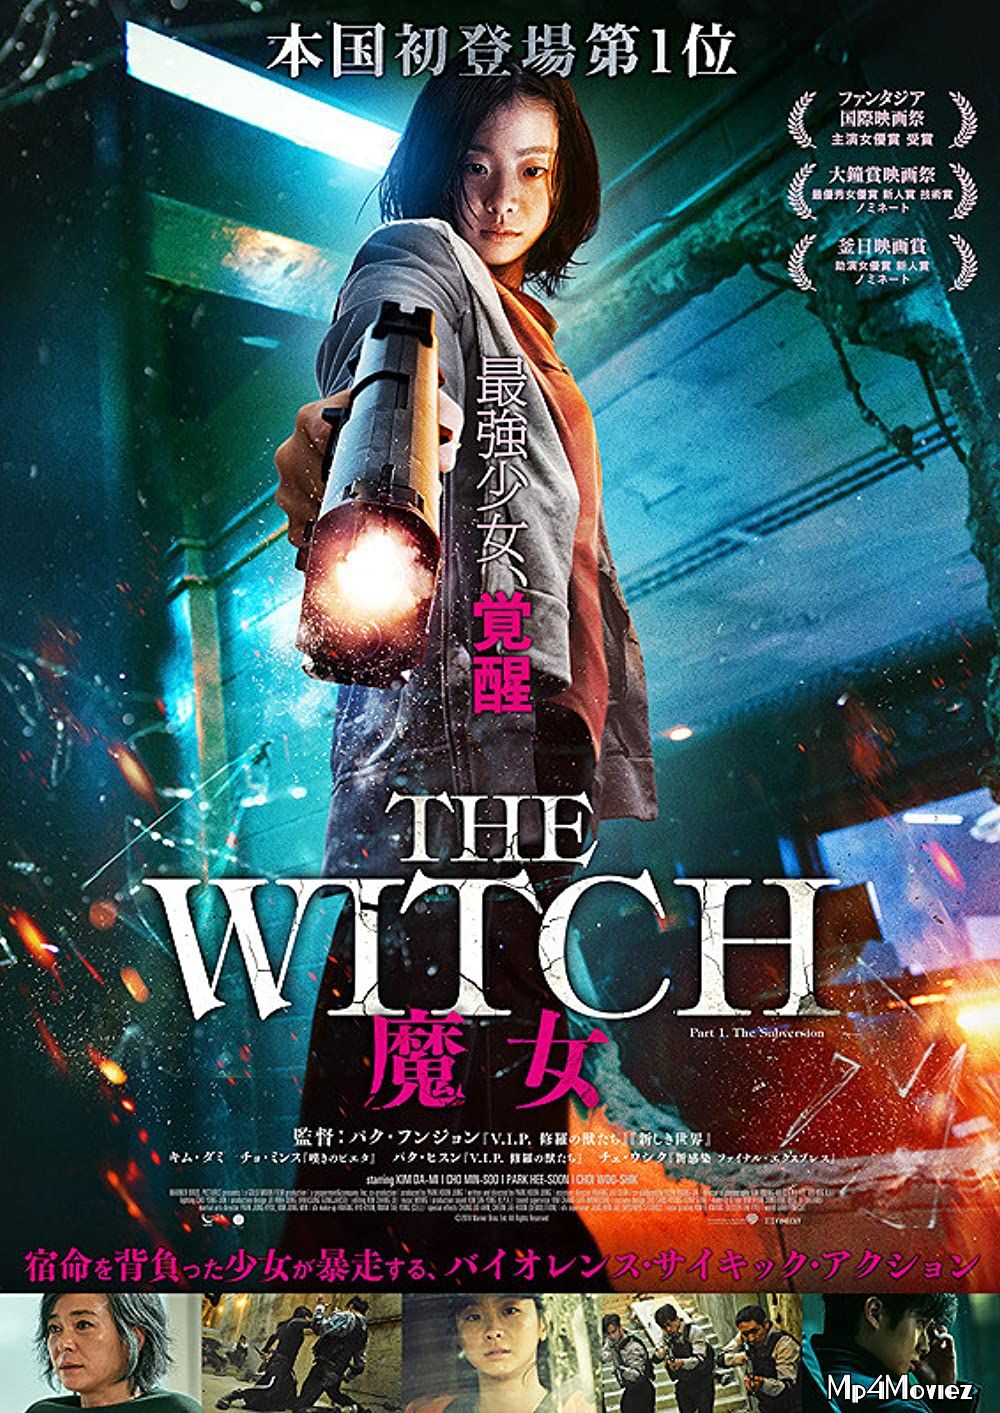 The Witch Part 1 The Subversion (2018) Hindi Dubbed BluRay download full movie